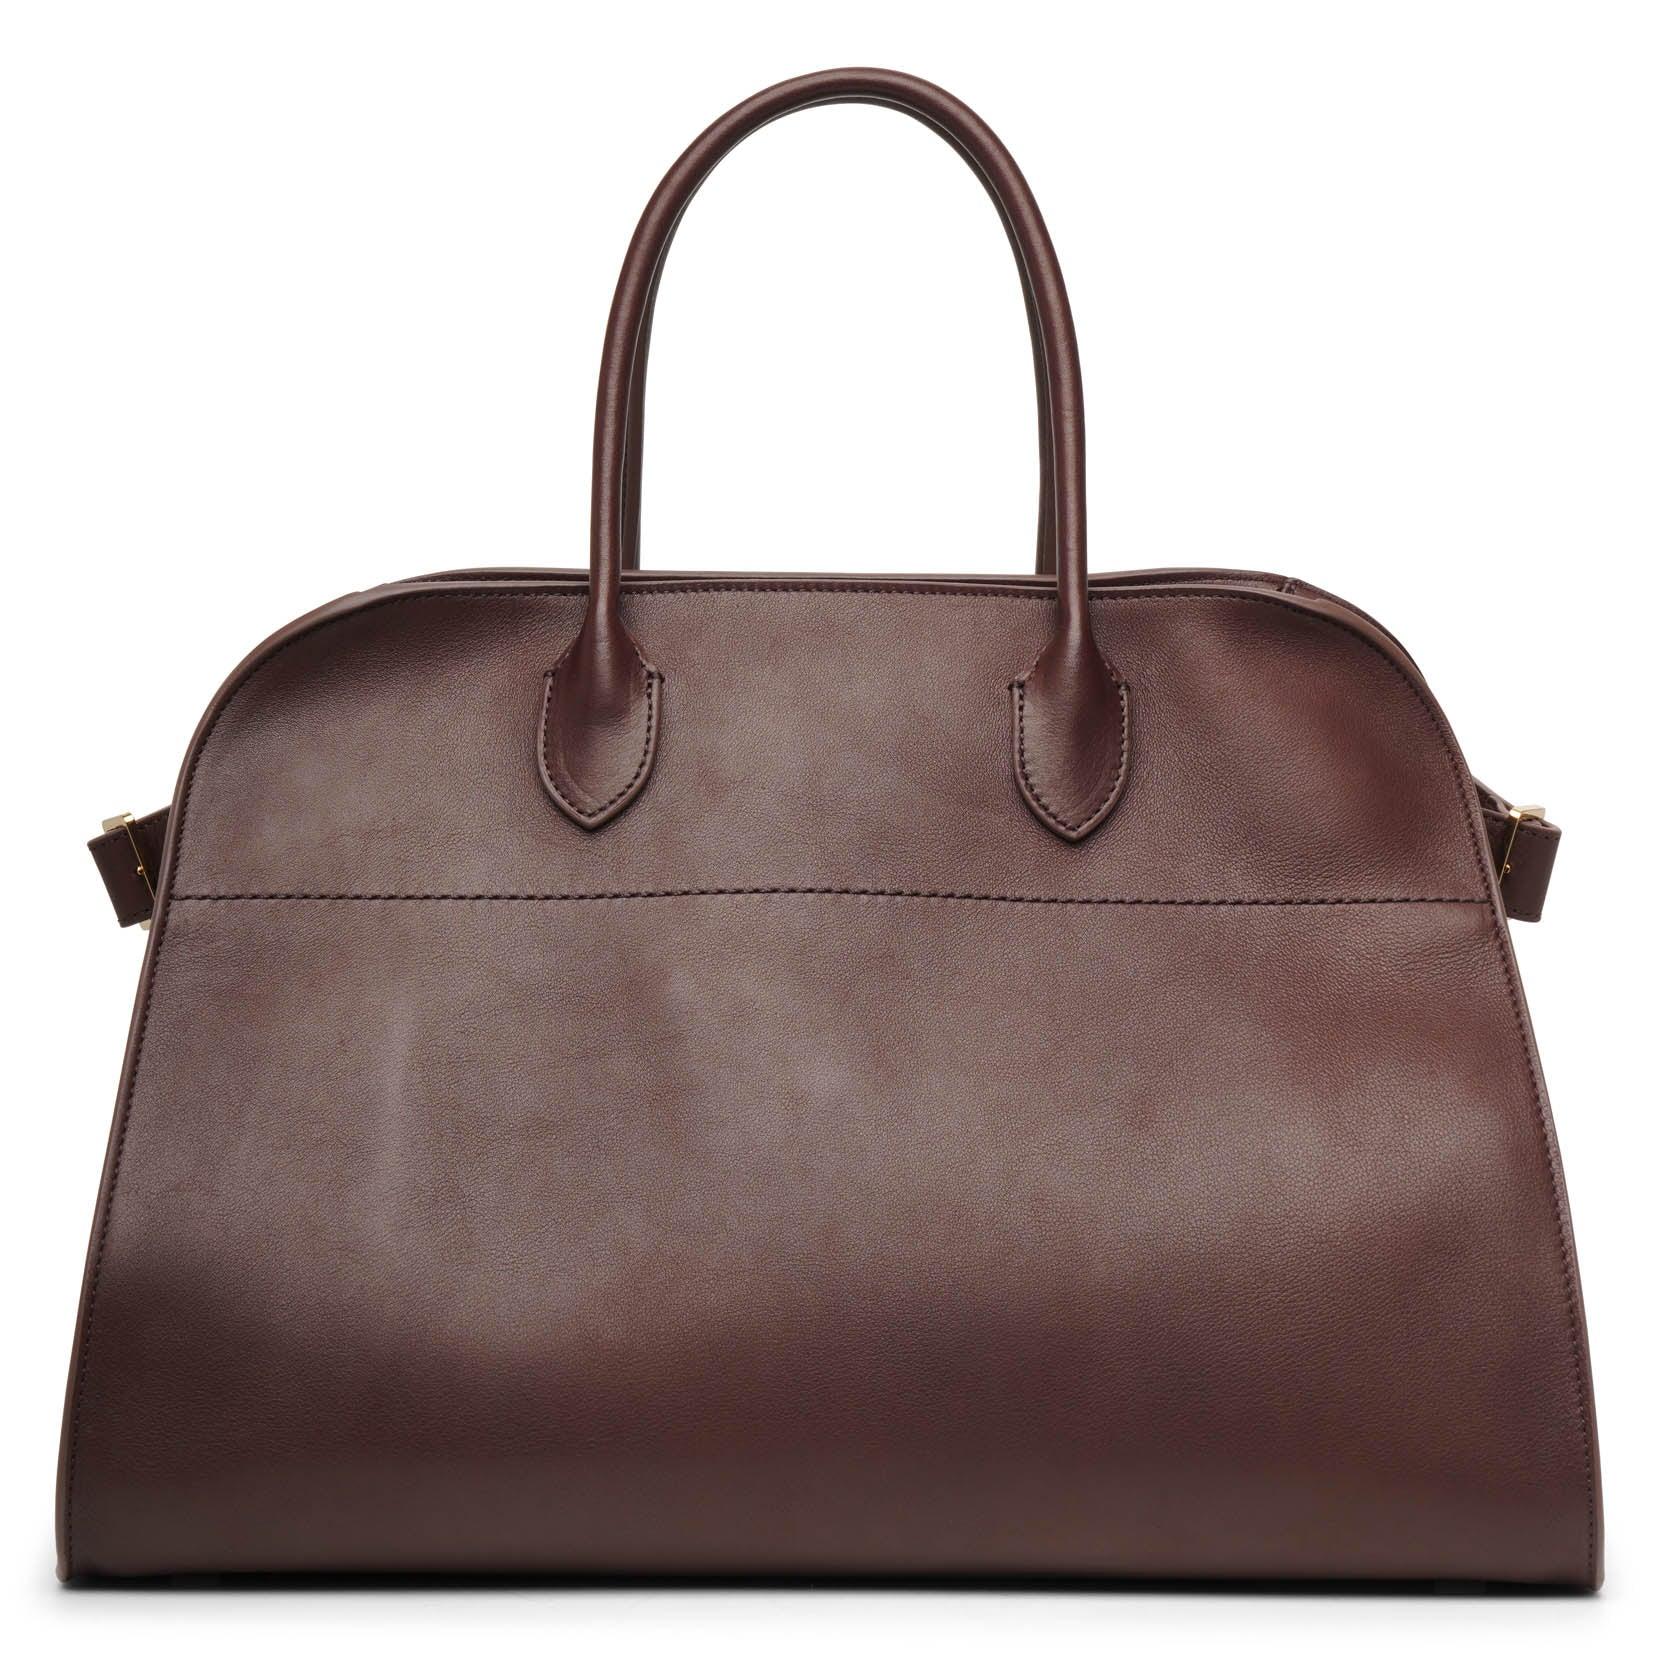 The Row Soft Margaux 15 Burgundy Saddle Bag in Brown | Lyst